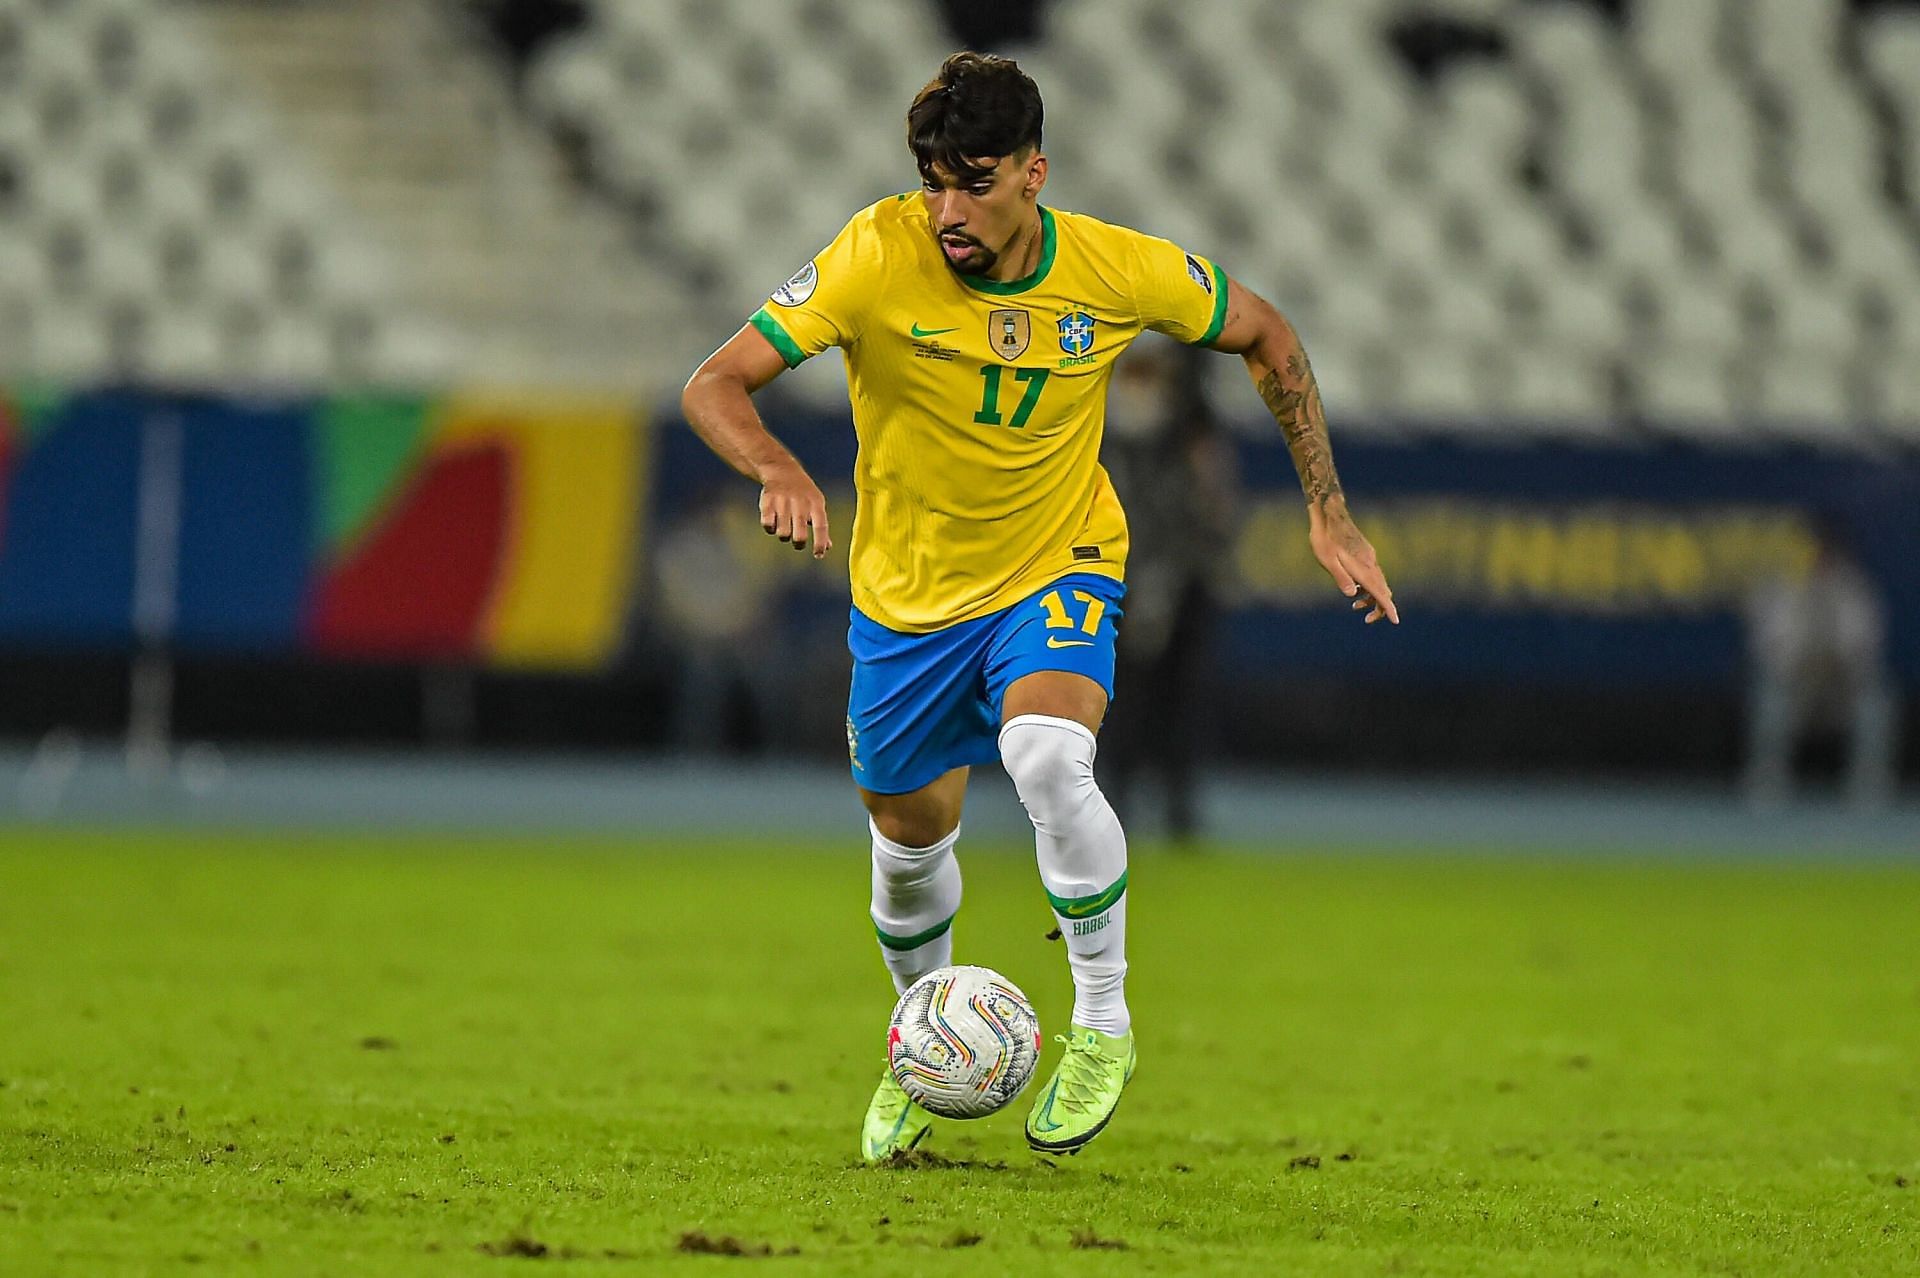 Paqueta has forged a deadly partnership with Neymar up front.